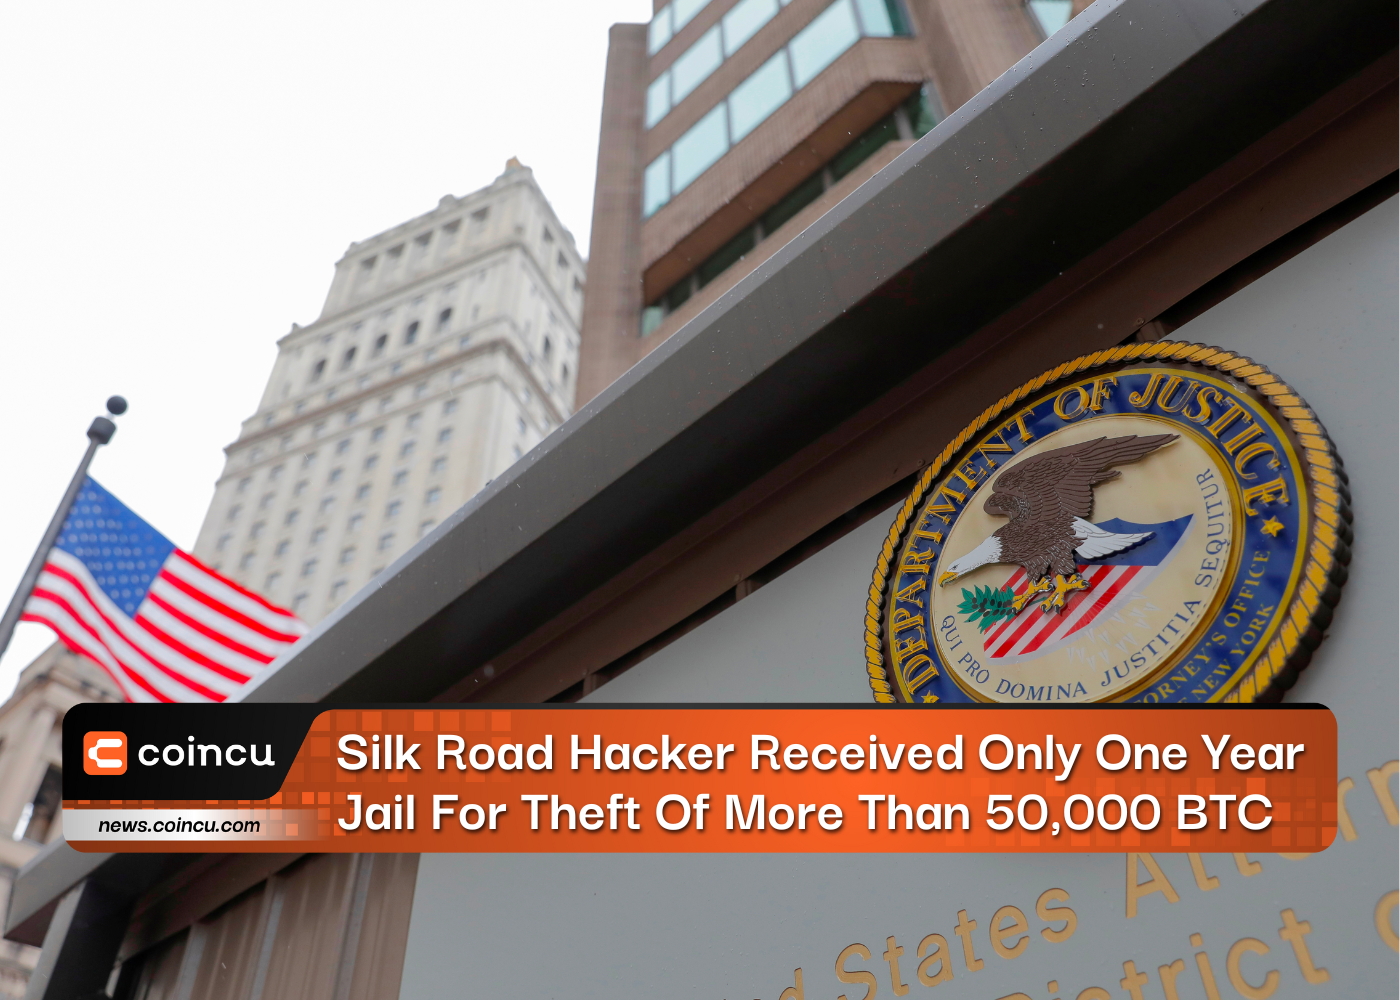 Silk Road Hacker Received Only One Year Jail For Theft Of More Than 50,000 BTC